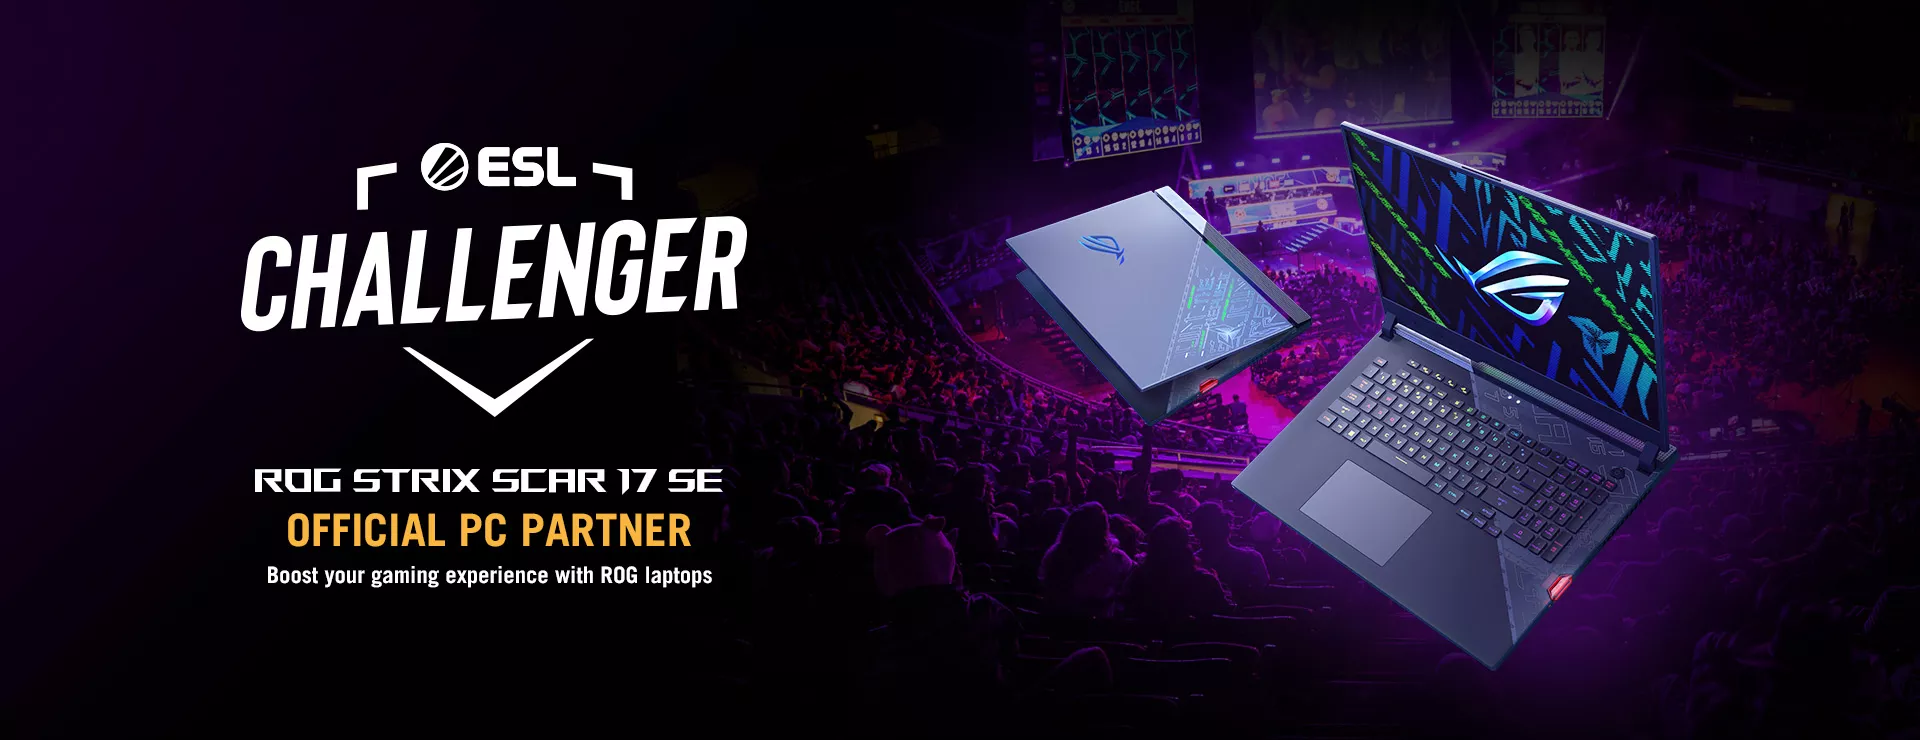 ESL Challenger ROG Strix Scar 17 SE Official PC Partner Boost your gaming experience with ROG Laptops